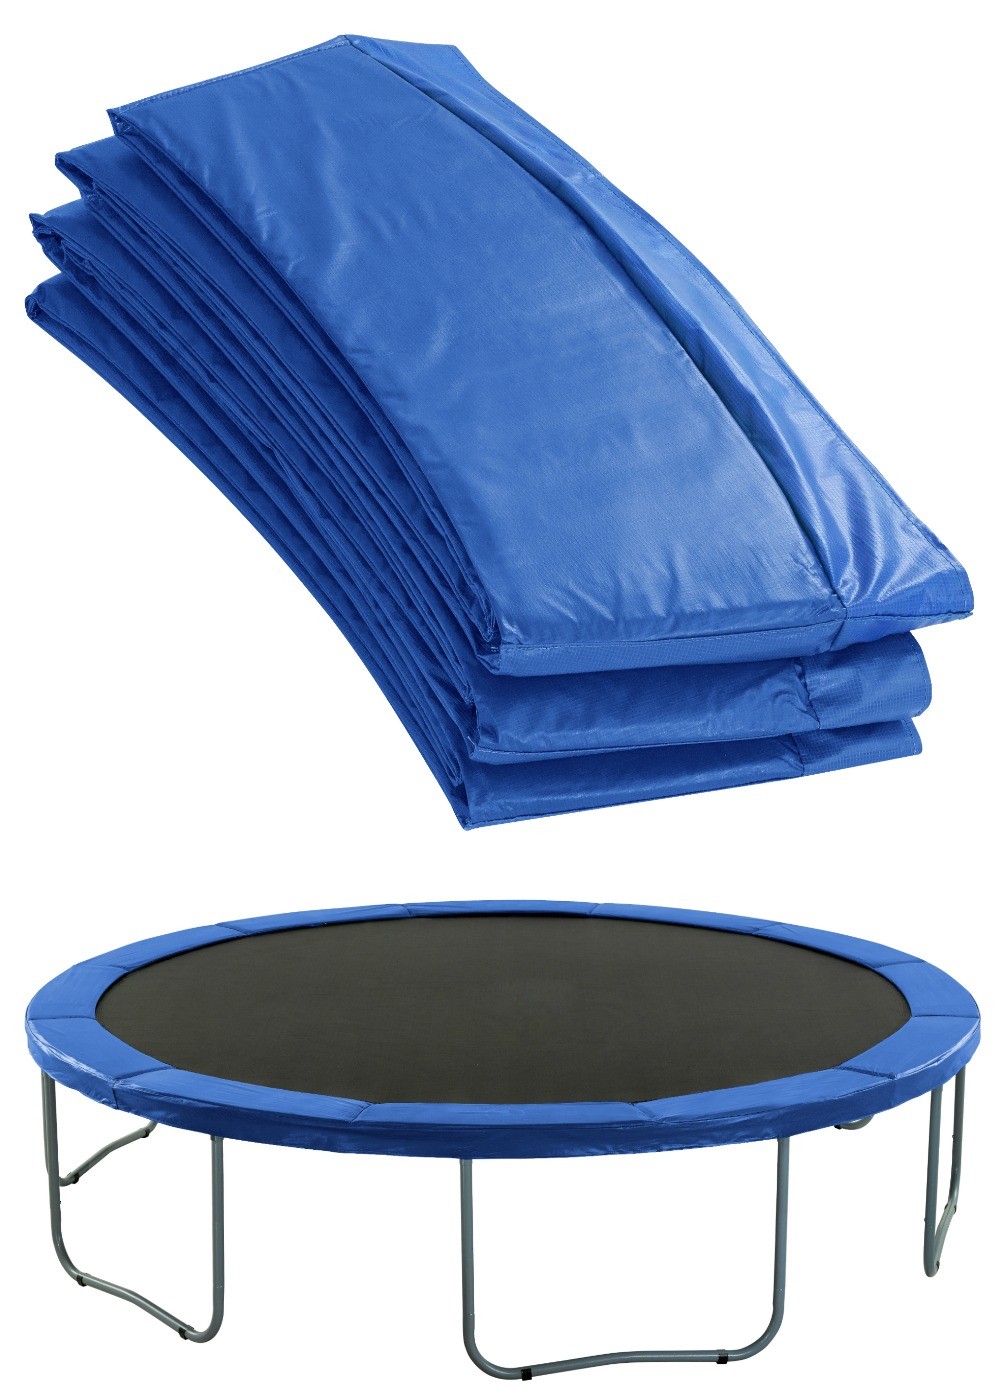 Premium Trampoline Replacement Safety Pad (Spring Cover) | Padding for 305cm 10ft Trampoline | Blue